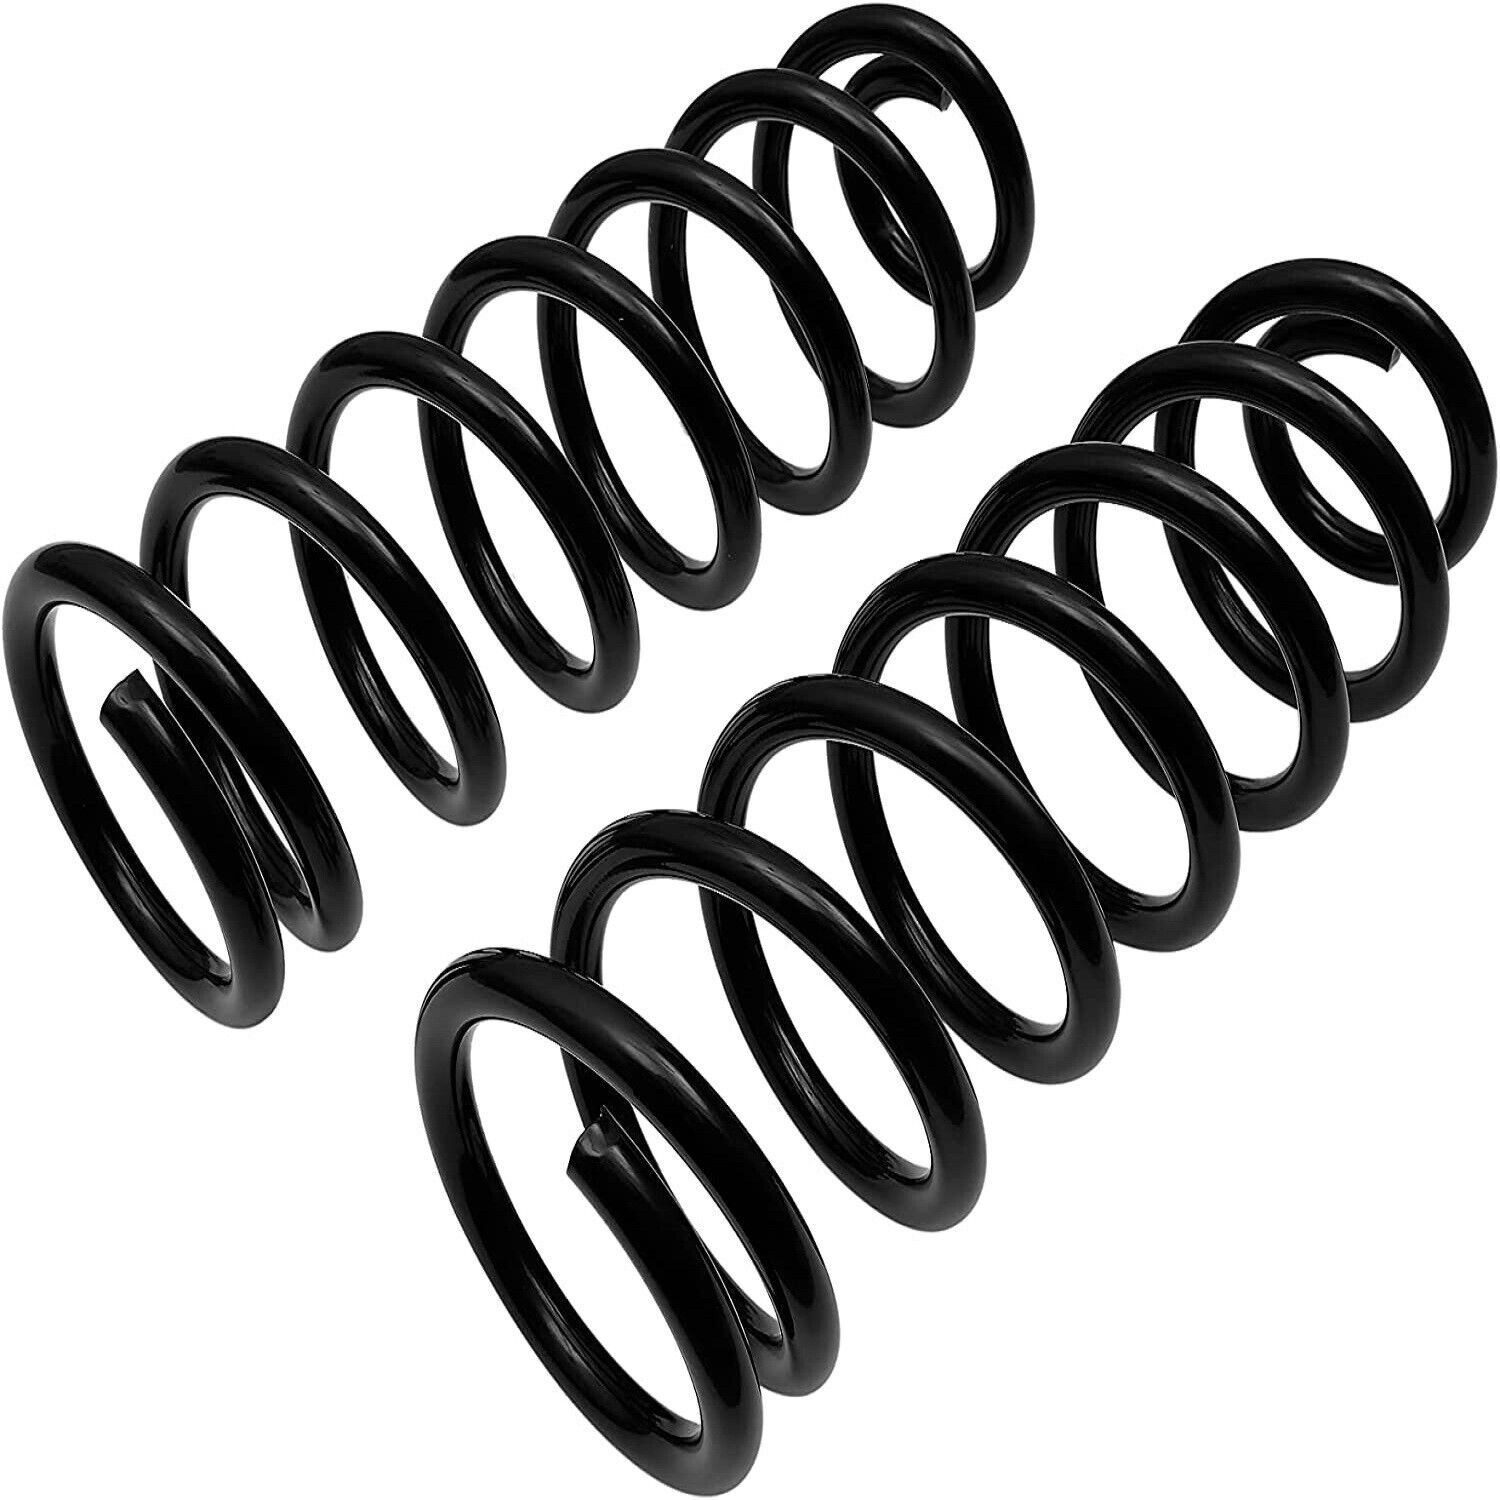 Rear Coil Spring Kit 50% Heavier for Ram 1500 Provide an Extra 50% Load Capacity